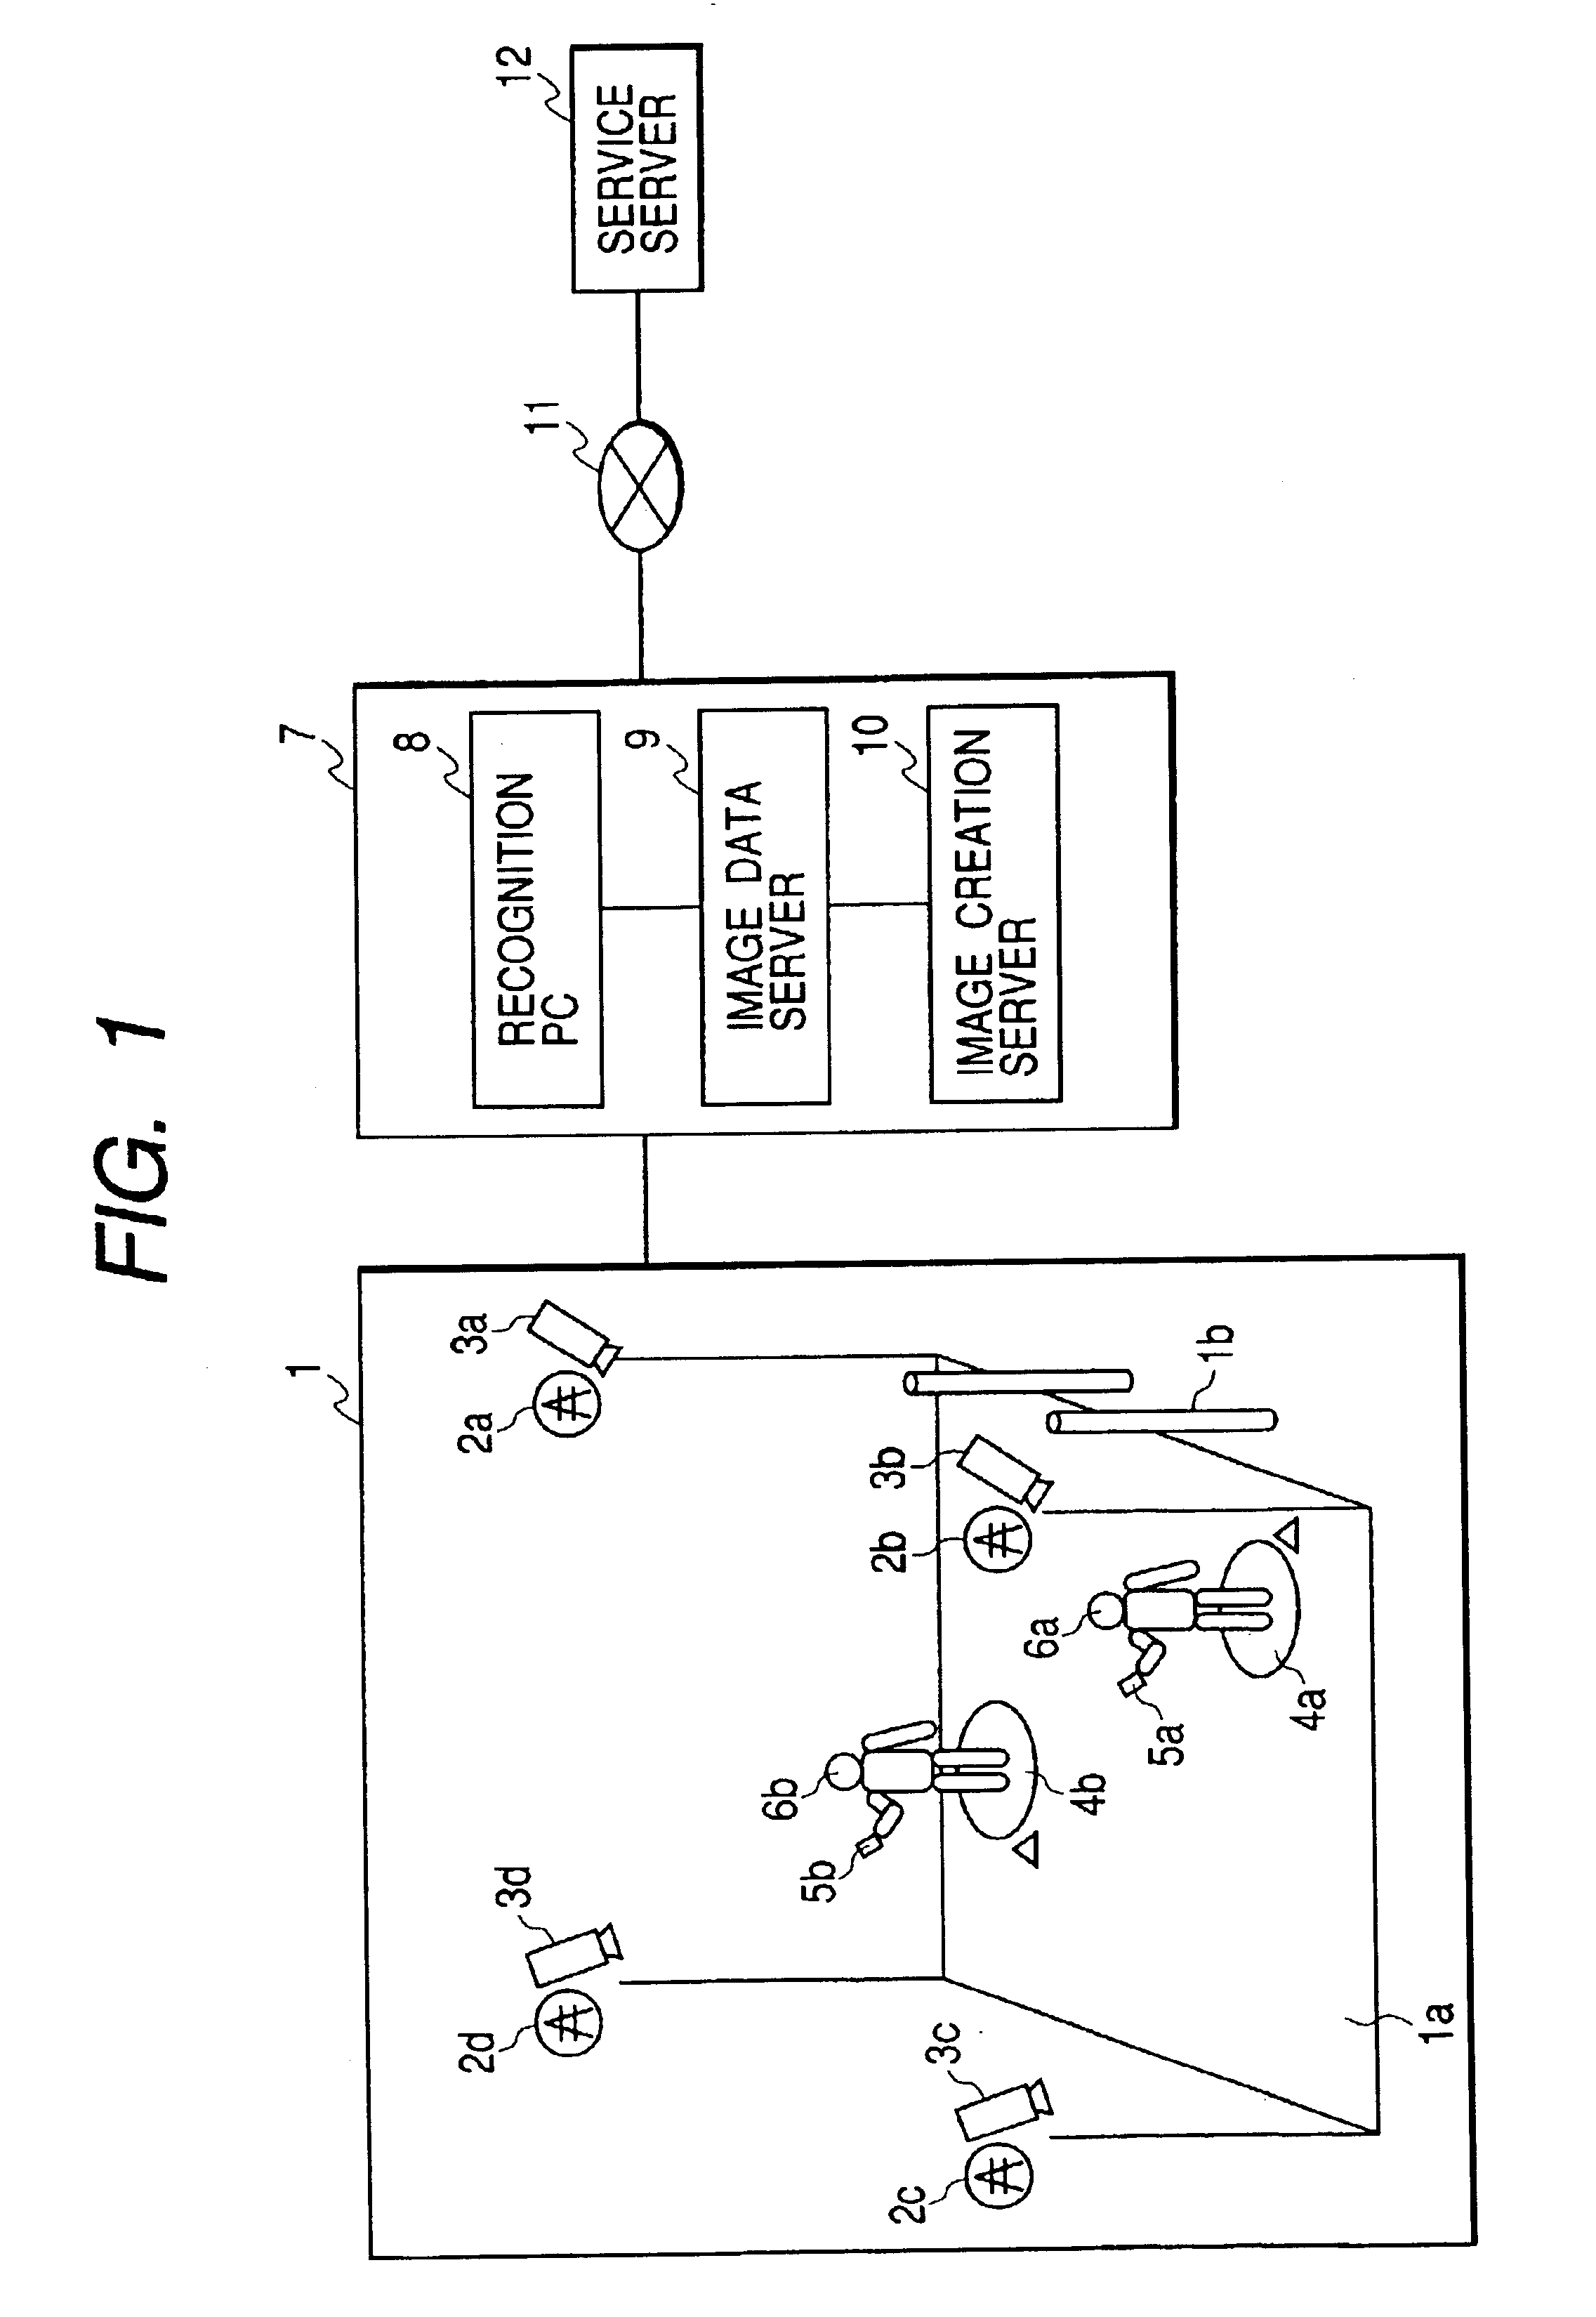 Method and system for displaying guidance information